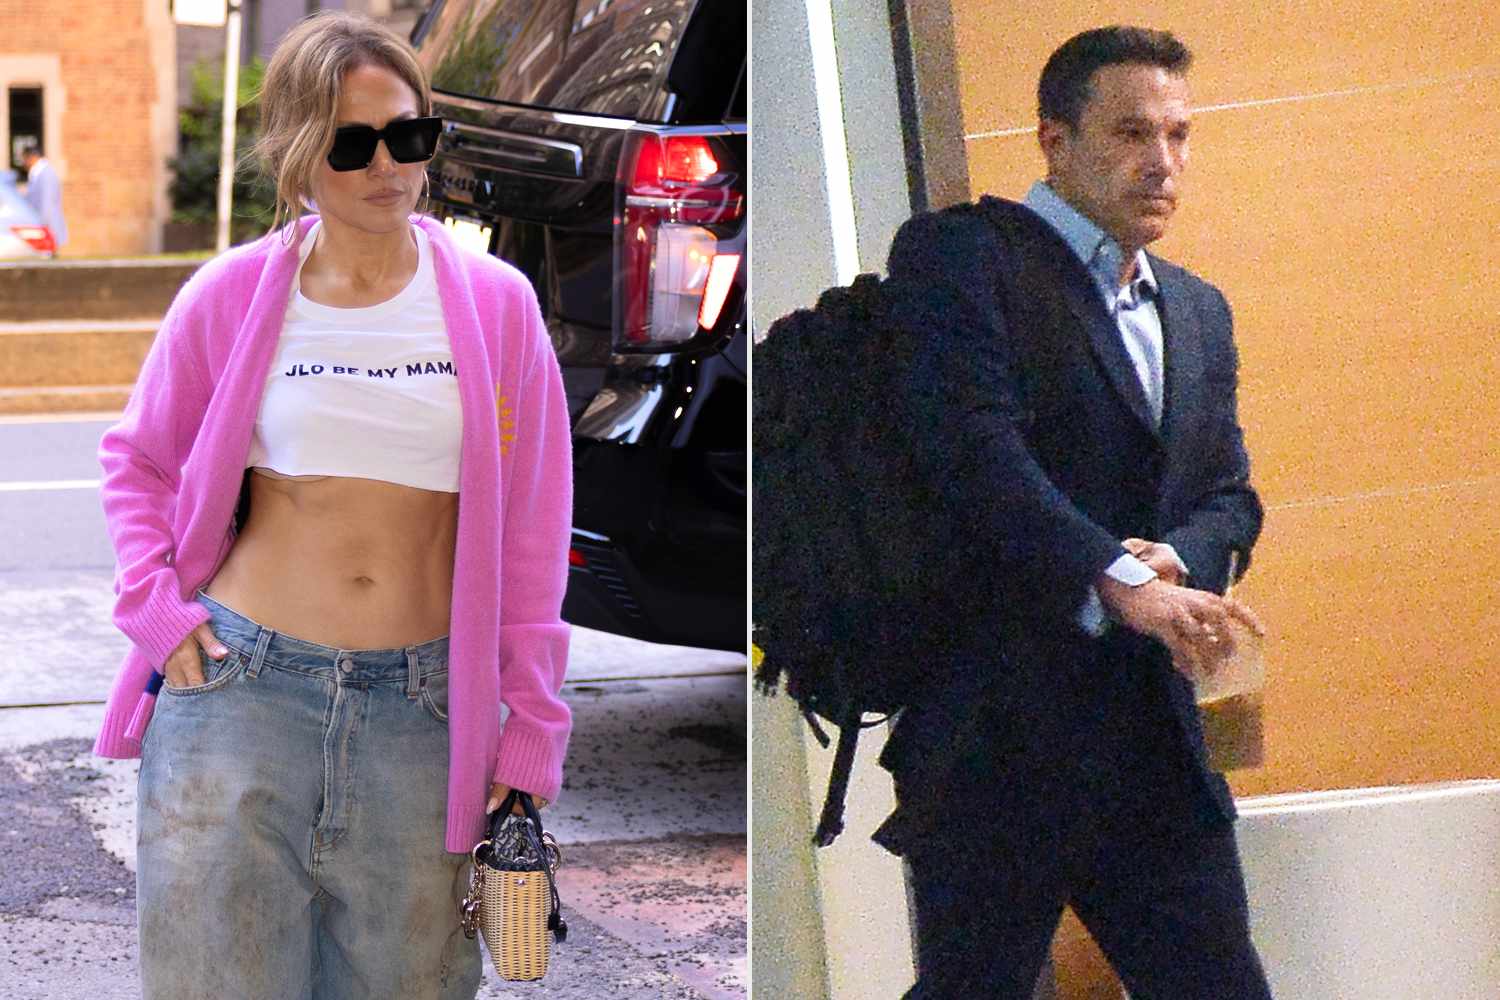 Jennifer Lopez steps out in NYC showing off her abs wearing a JLO be my mama crop top shirt. ; Ben Affleck is spotted headed to his office in Los Angeles. Ben was seeing wearing his wedding band amid reports of a pending divorce from Jennifer Lopez. 